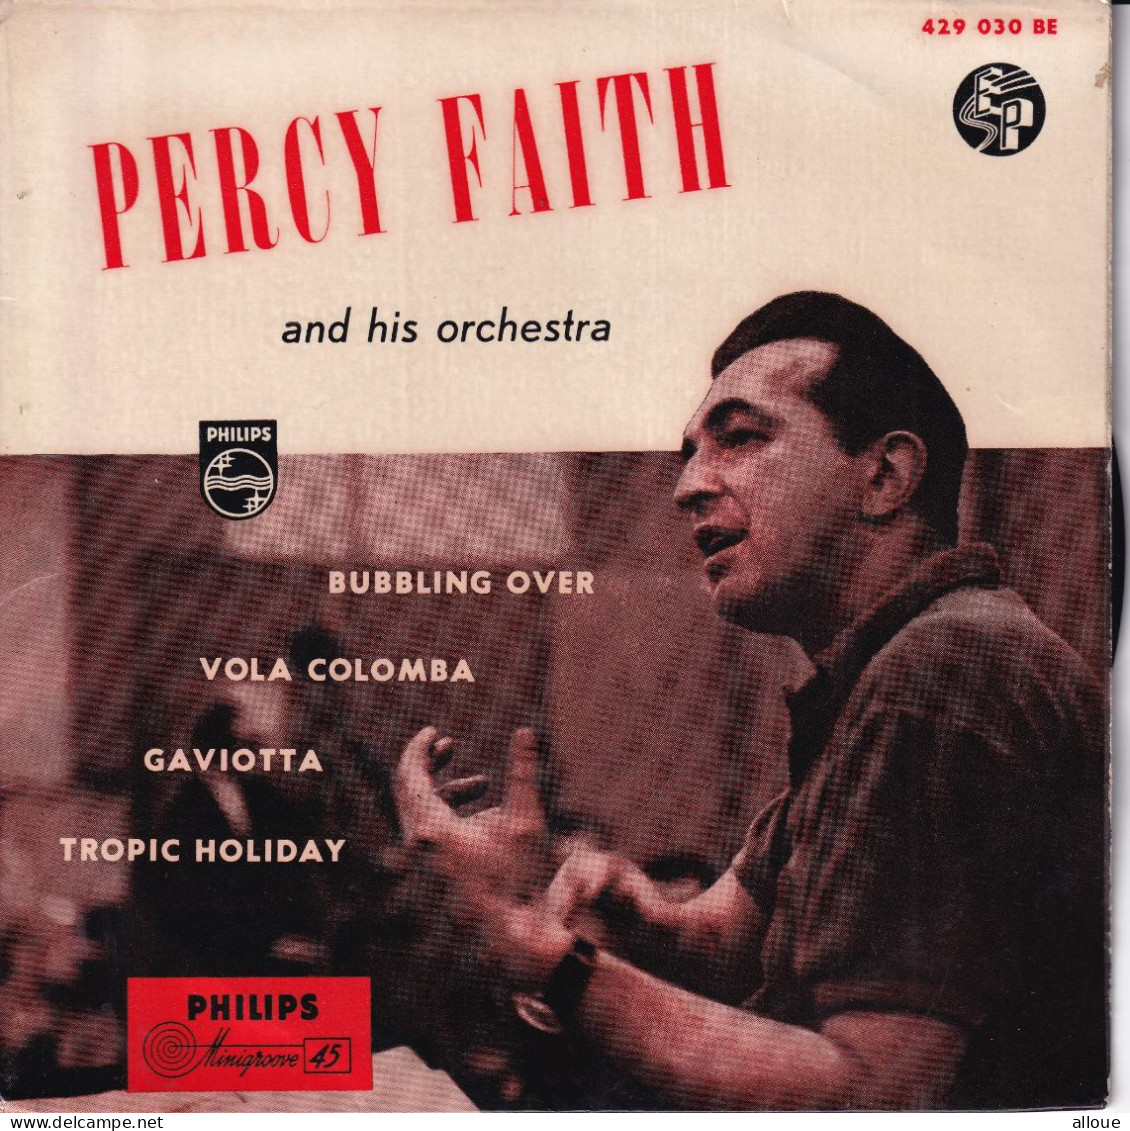 PERCY FAITH - HL EP - DUBBLING OVER + 3 - Instrumental